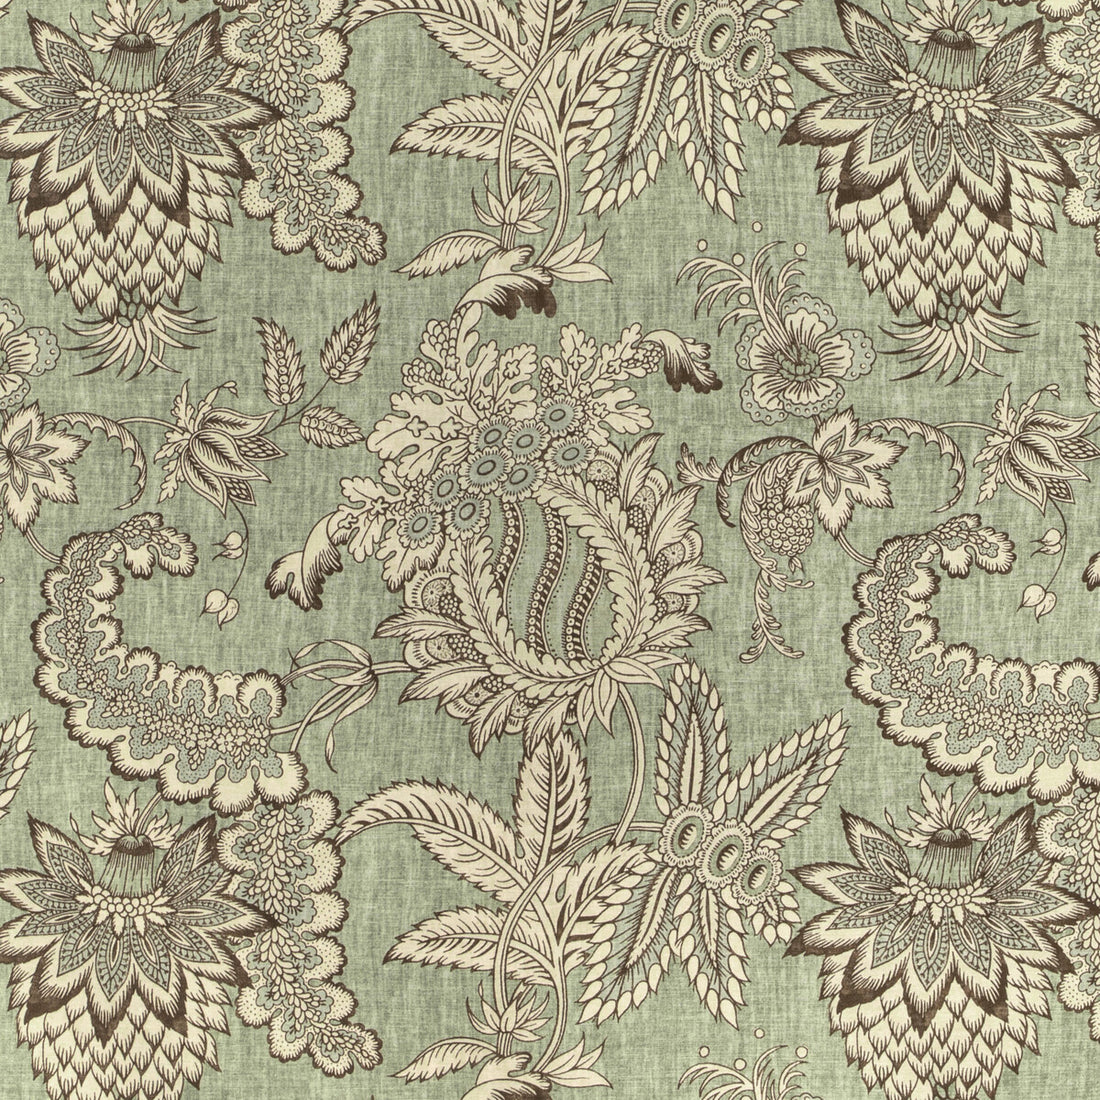 Jennings Print fabric in green color - pattern 2022115.3.0 - by Lee Jofa in the Bunny Williams Arcadia collection